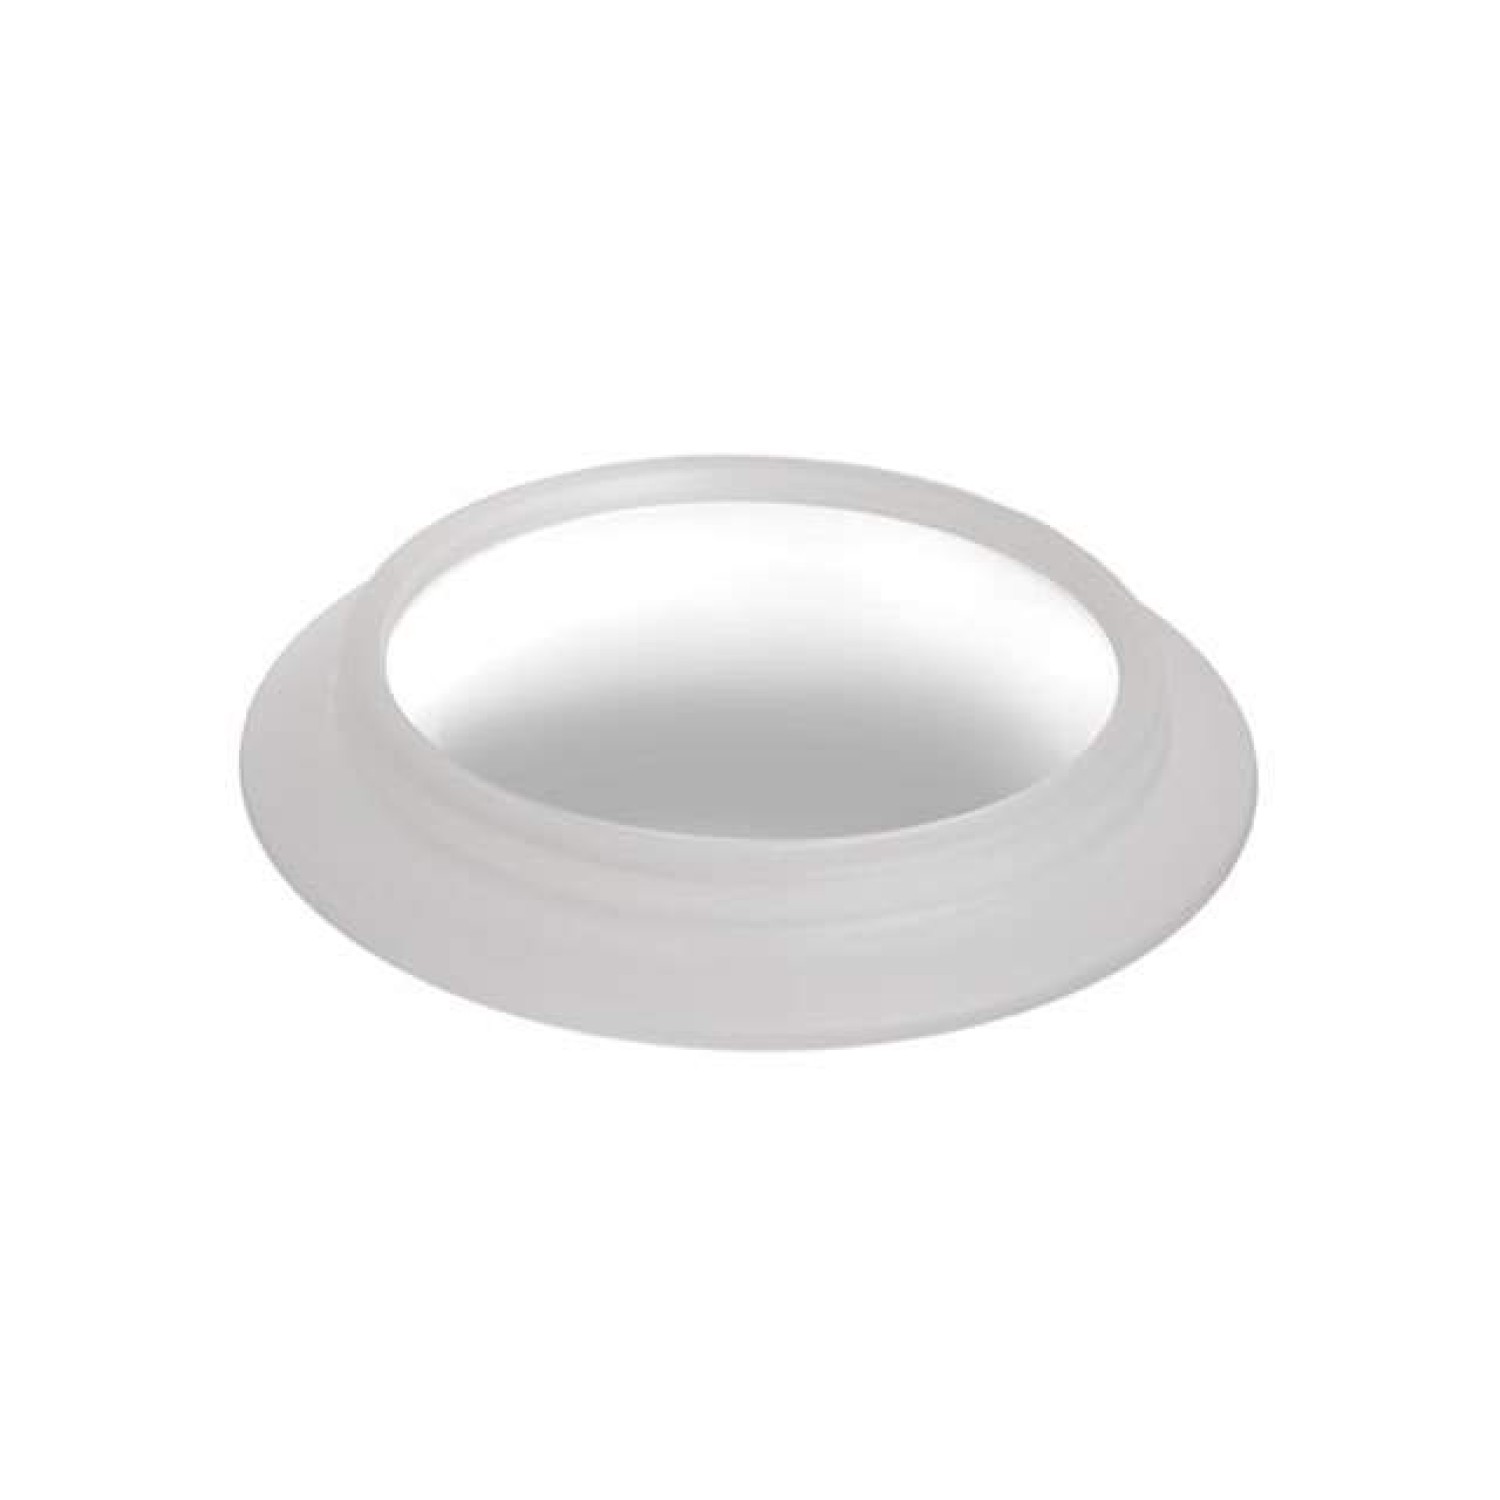 Luxo SPD025980 STAYS Lens, 4 Diopter